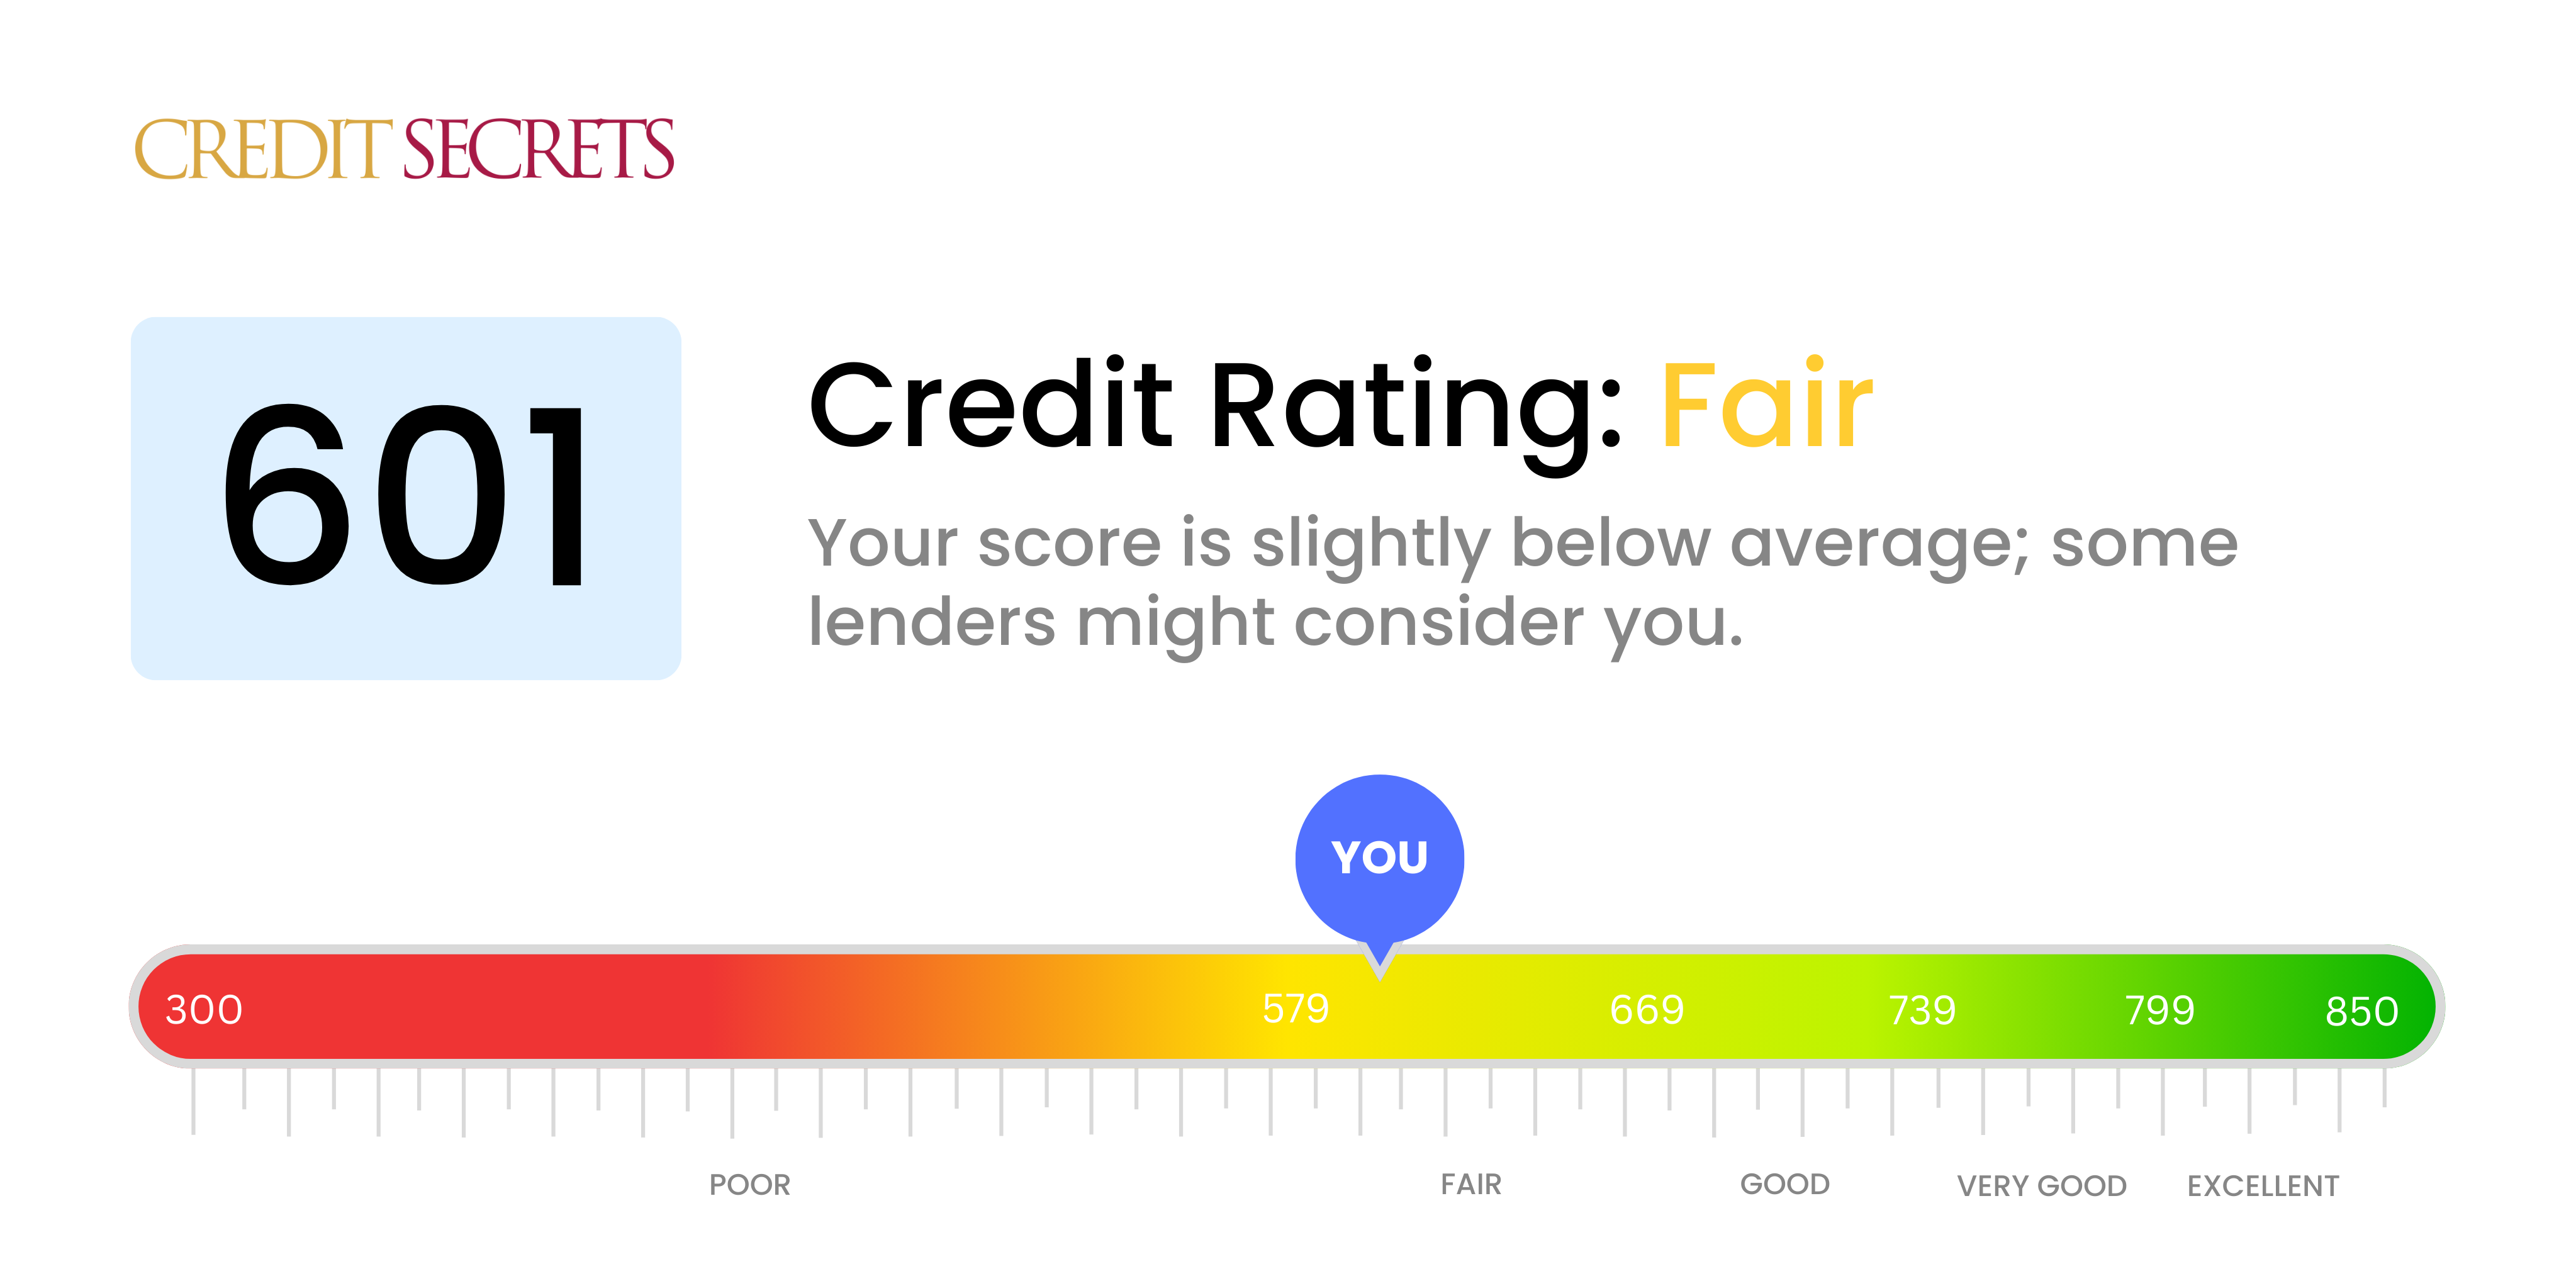 Is 601 a good credit score?